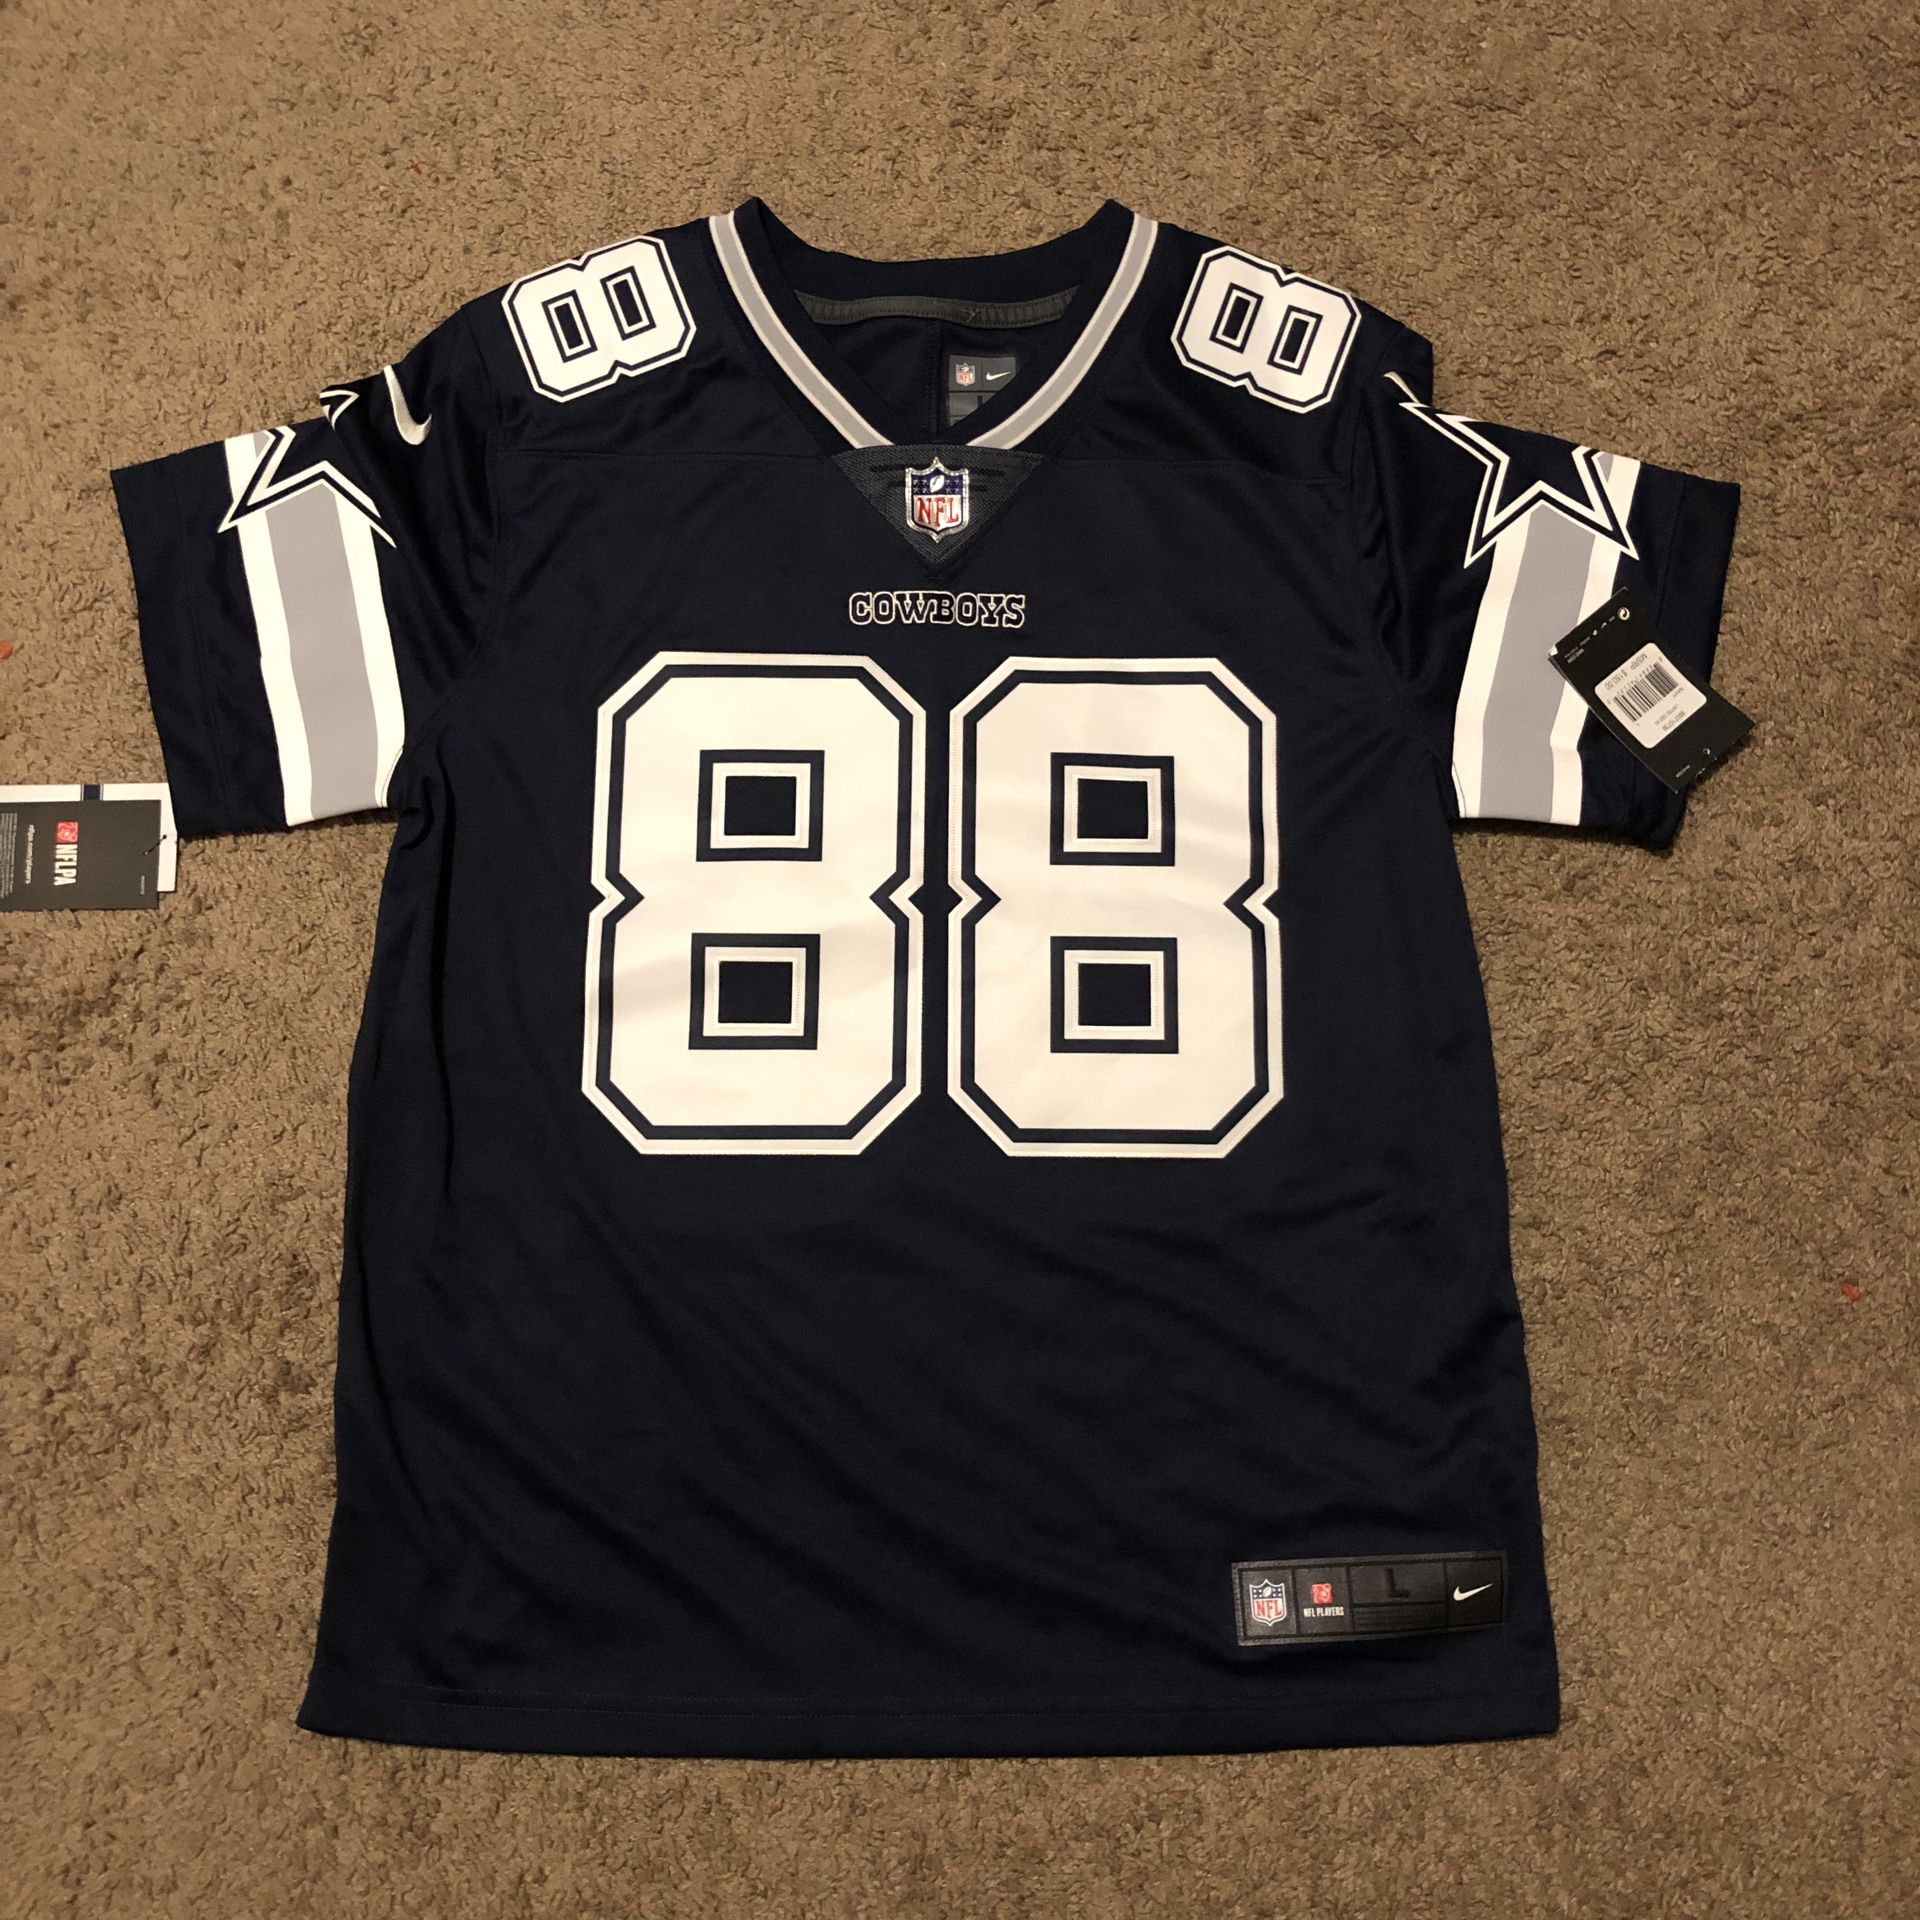 Dallas Cowboys Dez Bryant Jersey for Sale in Midland, TX - OfferUp